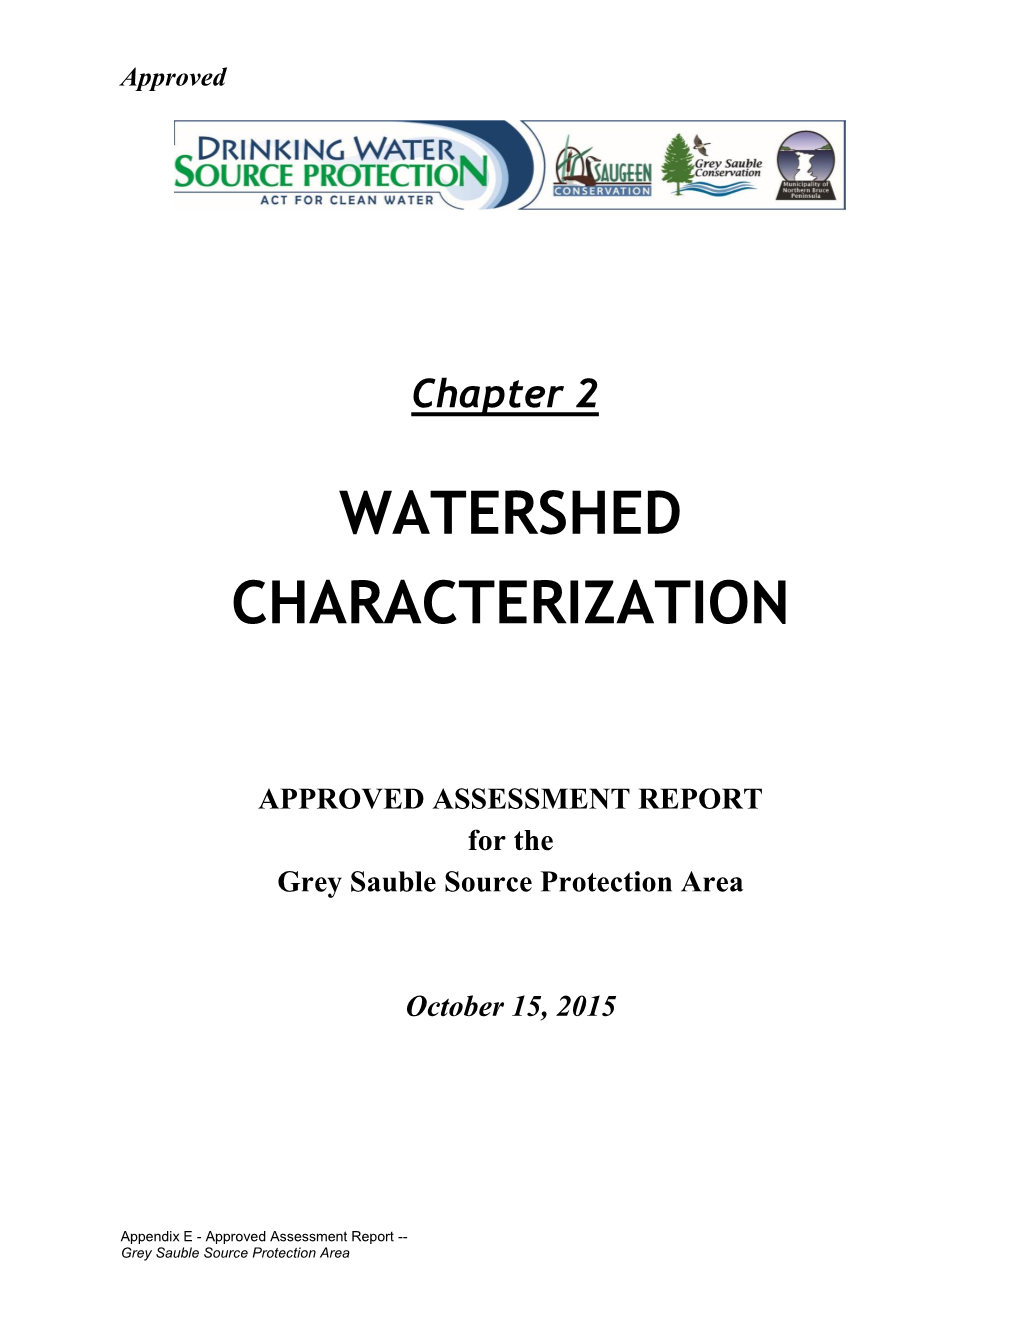 Chapter 2: Watershed Characterization